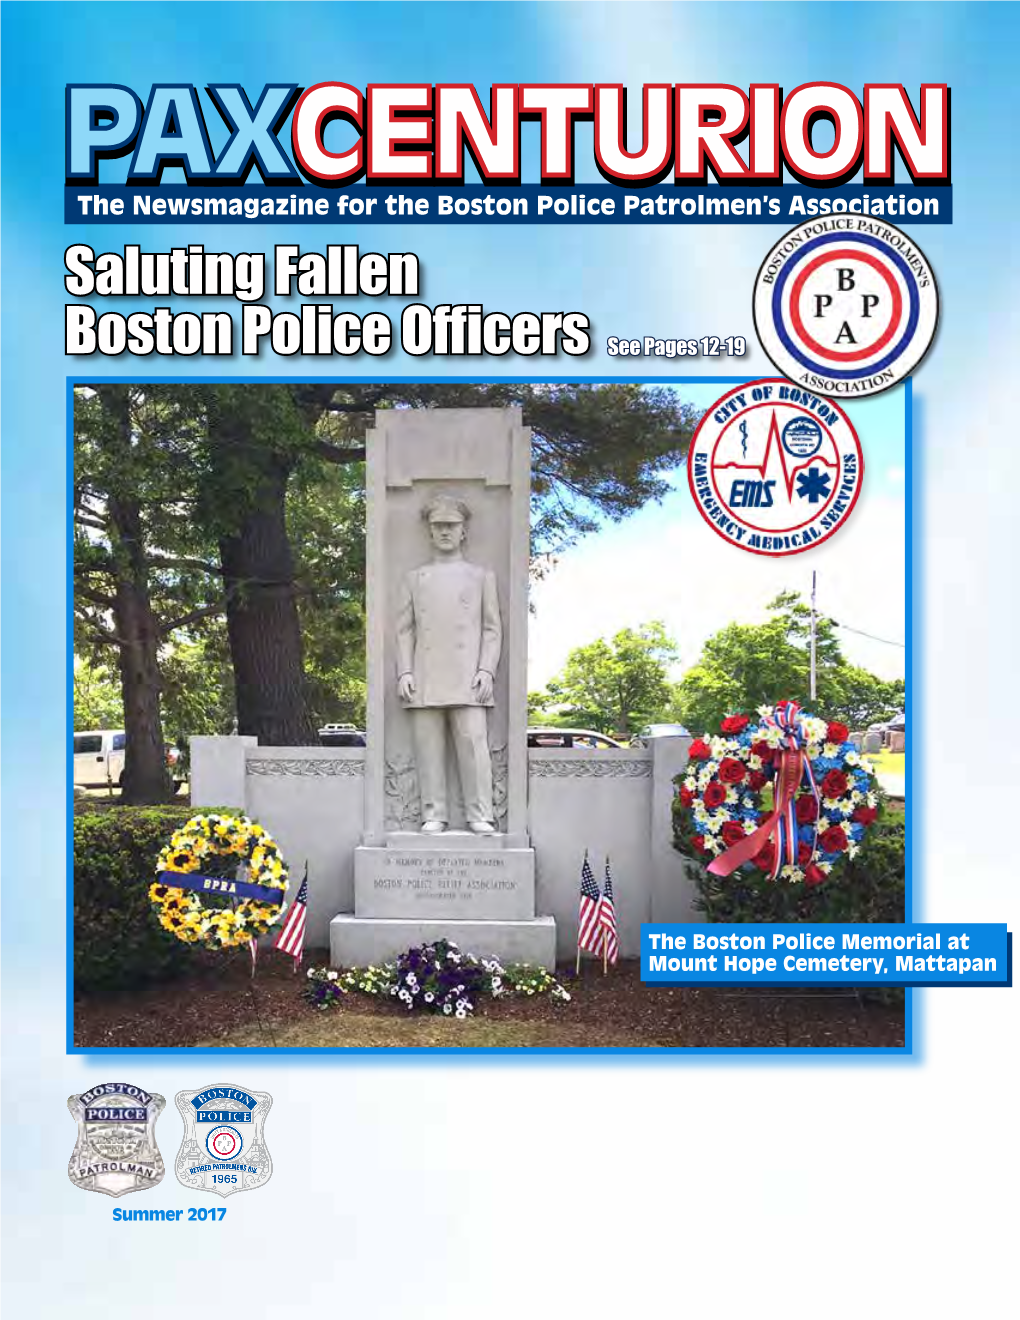 PAX CENTURION • Summer 2017 • Page 1 Quincy College Partners with BOSTON POLICE WE ARE YOUR STATE CERTIFIED EDUCATIONAL INSTITUTION